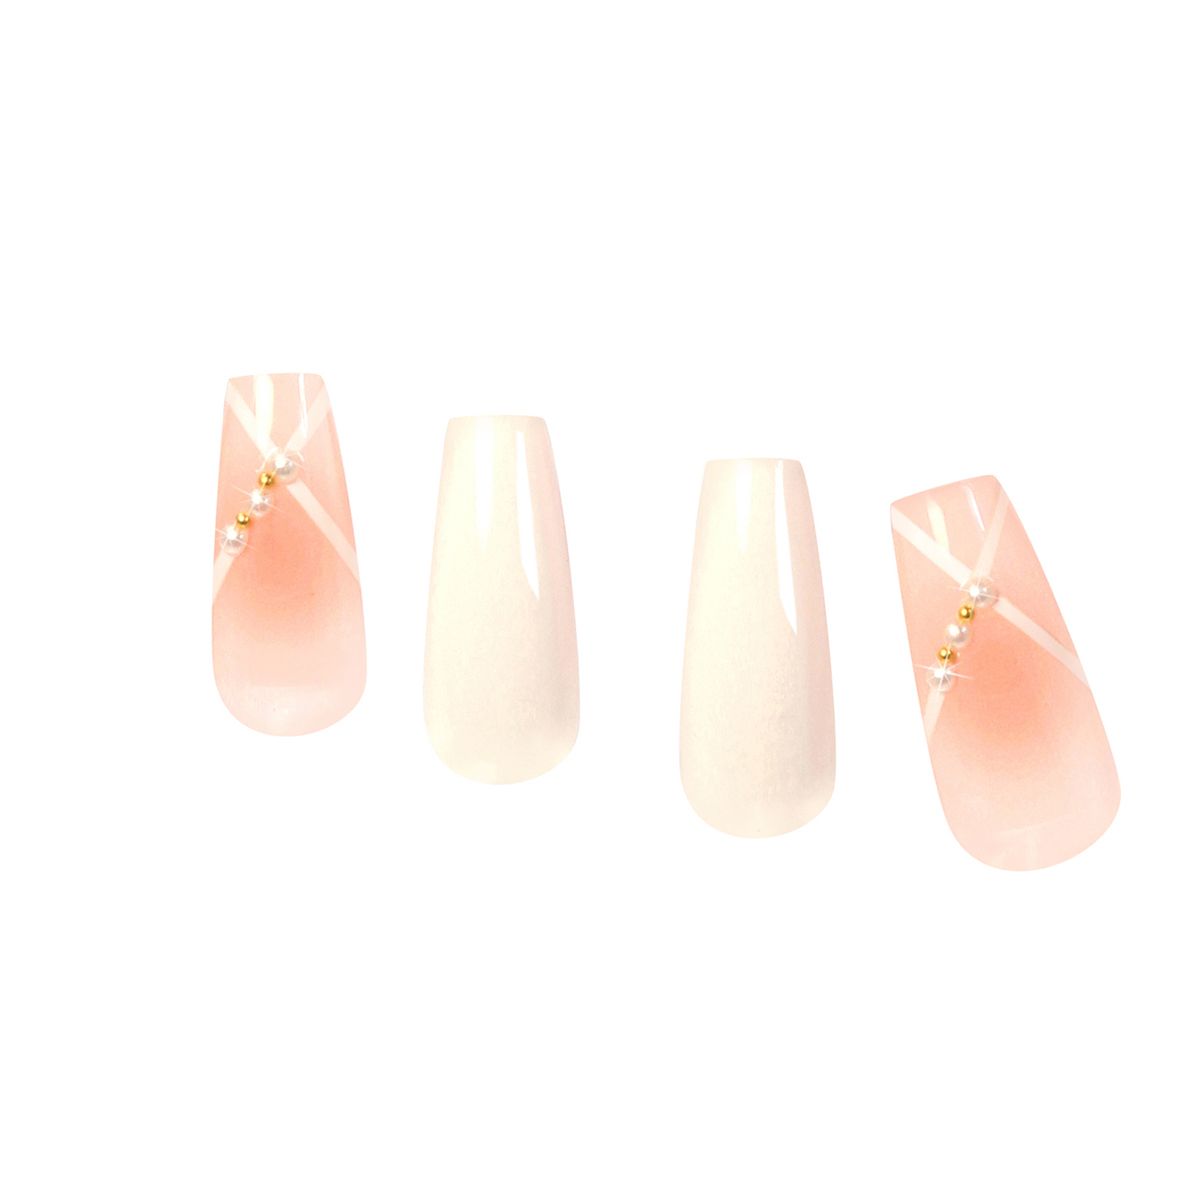 White Press On Nails with Glue - Coffin Shaped Nails by Poshmellow